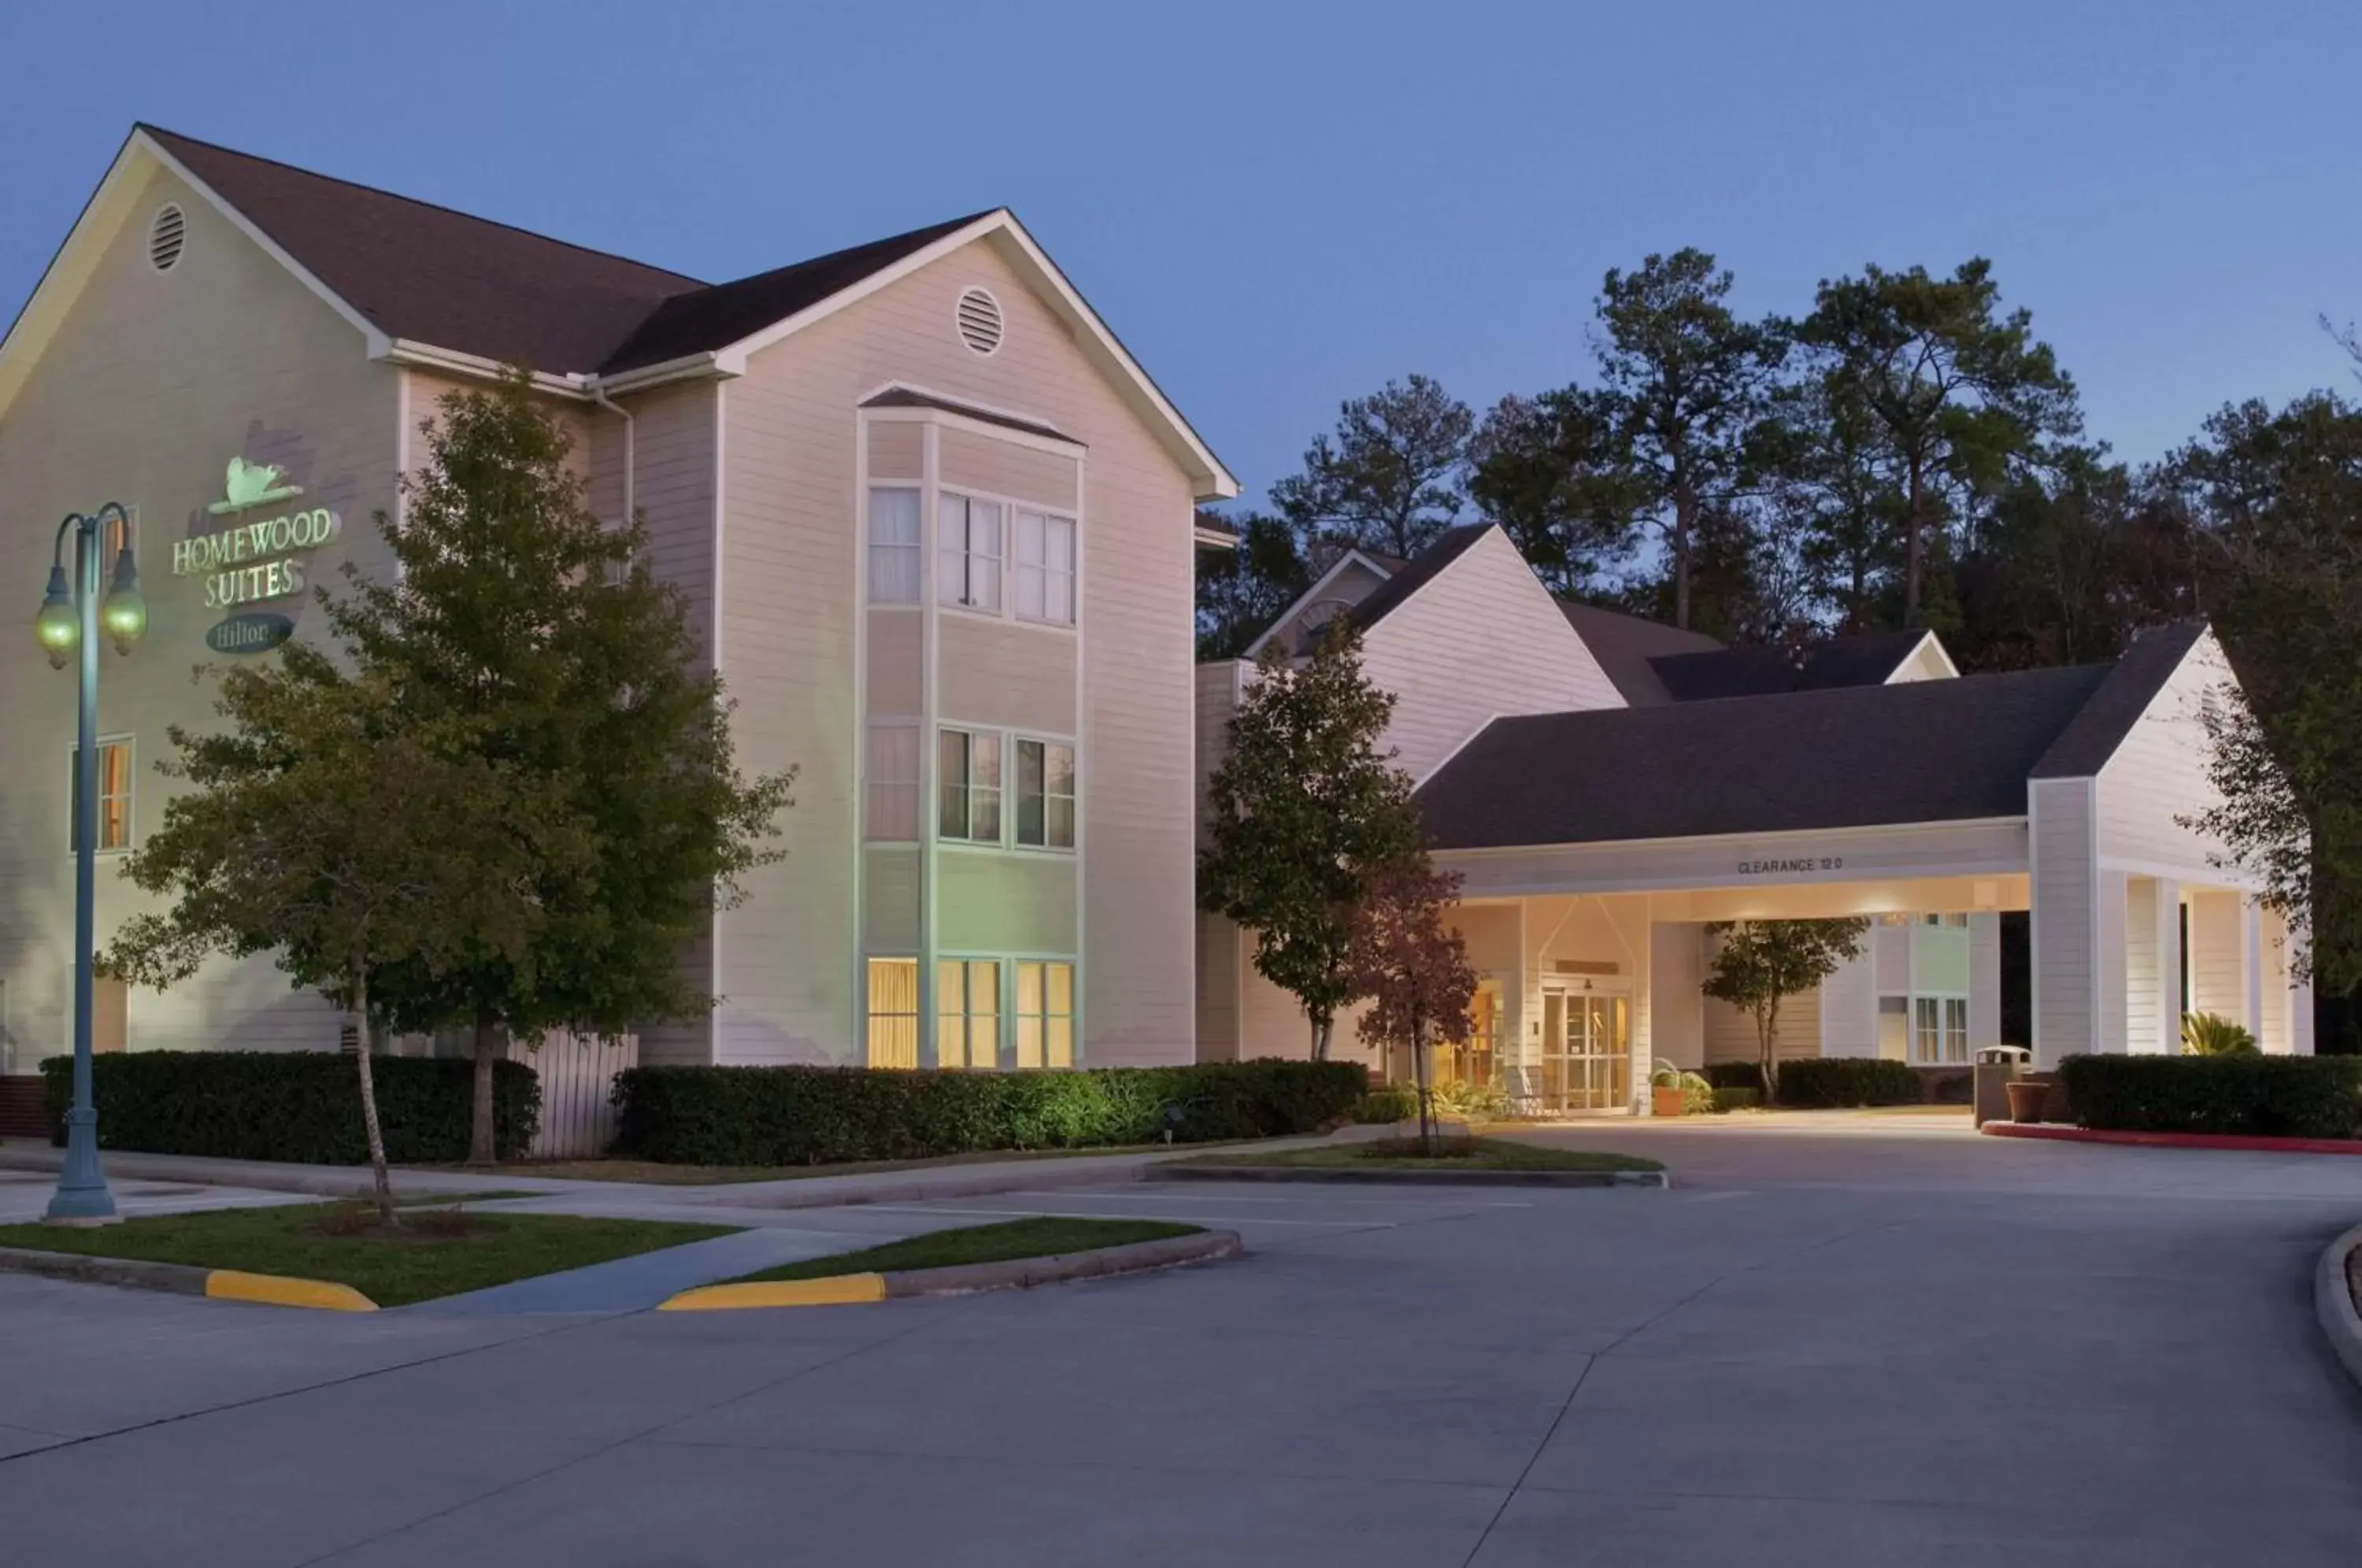 Property Building in Homewood Suites Houston Kingwood Parc Airport Area